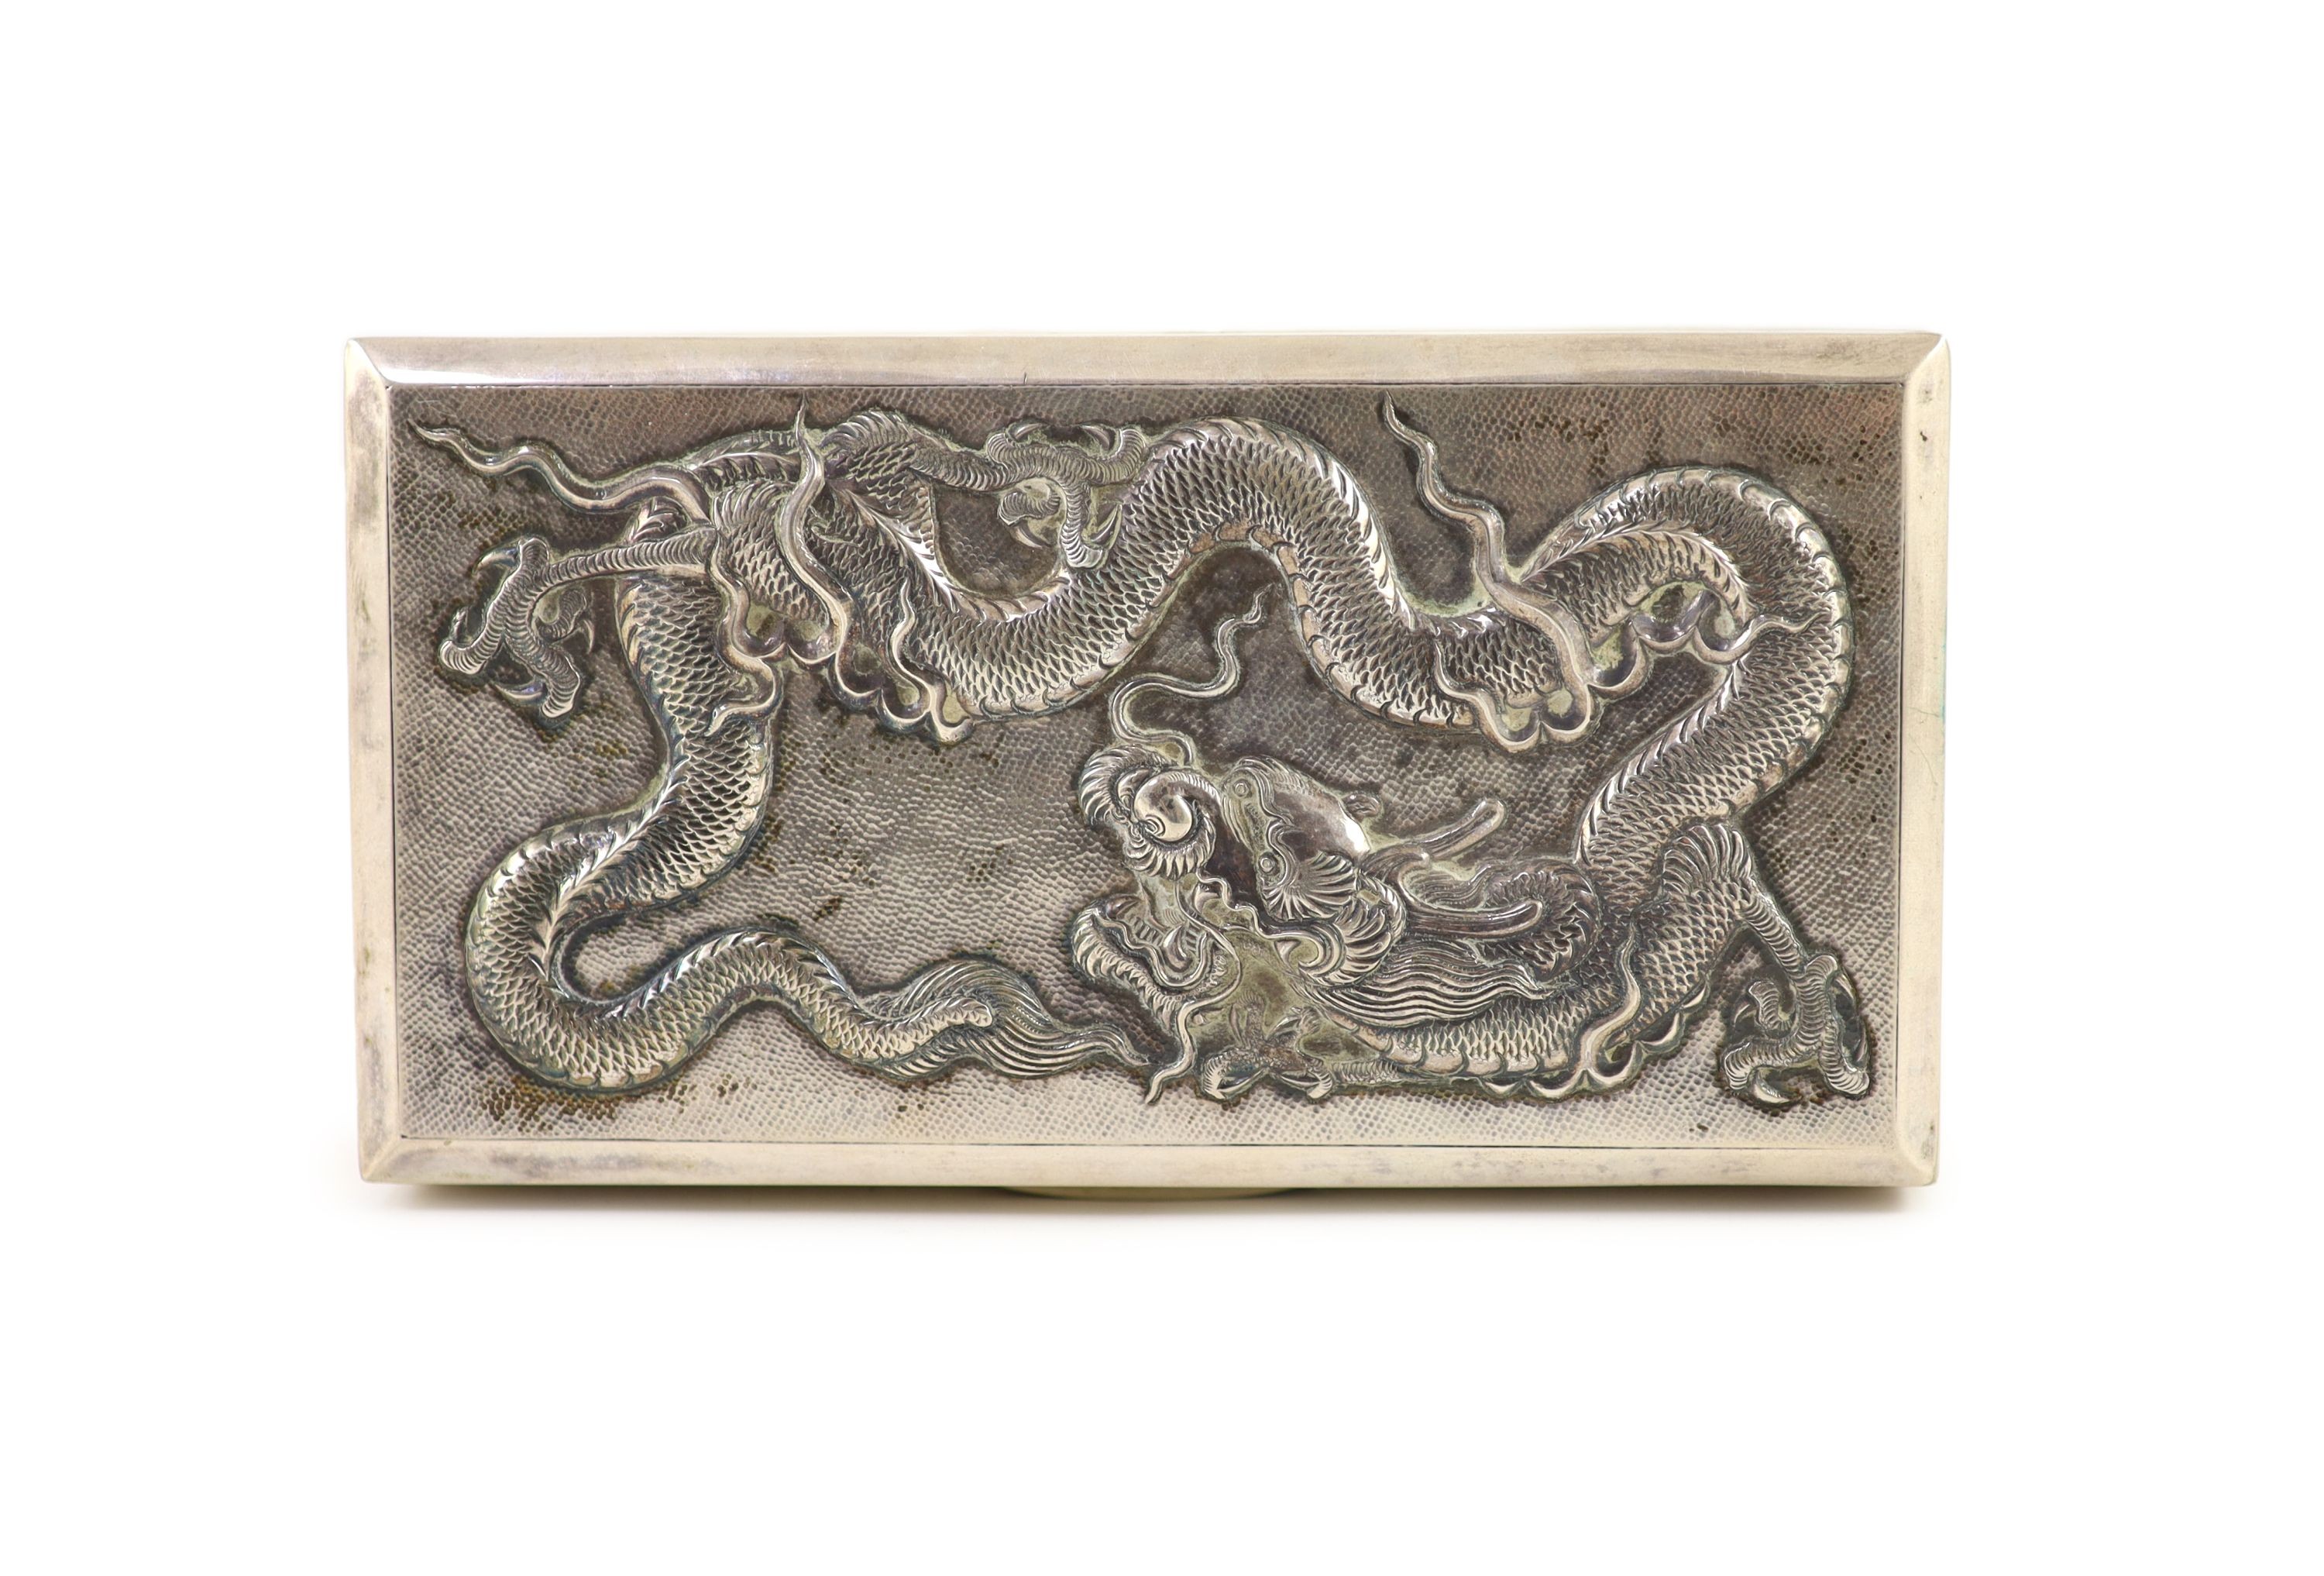 A late 19th/early 20th century Chinese silver mounted cigarette box by Tack Hing                                                                                                                                            